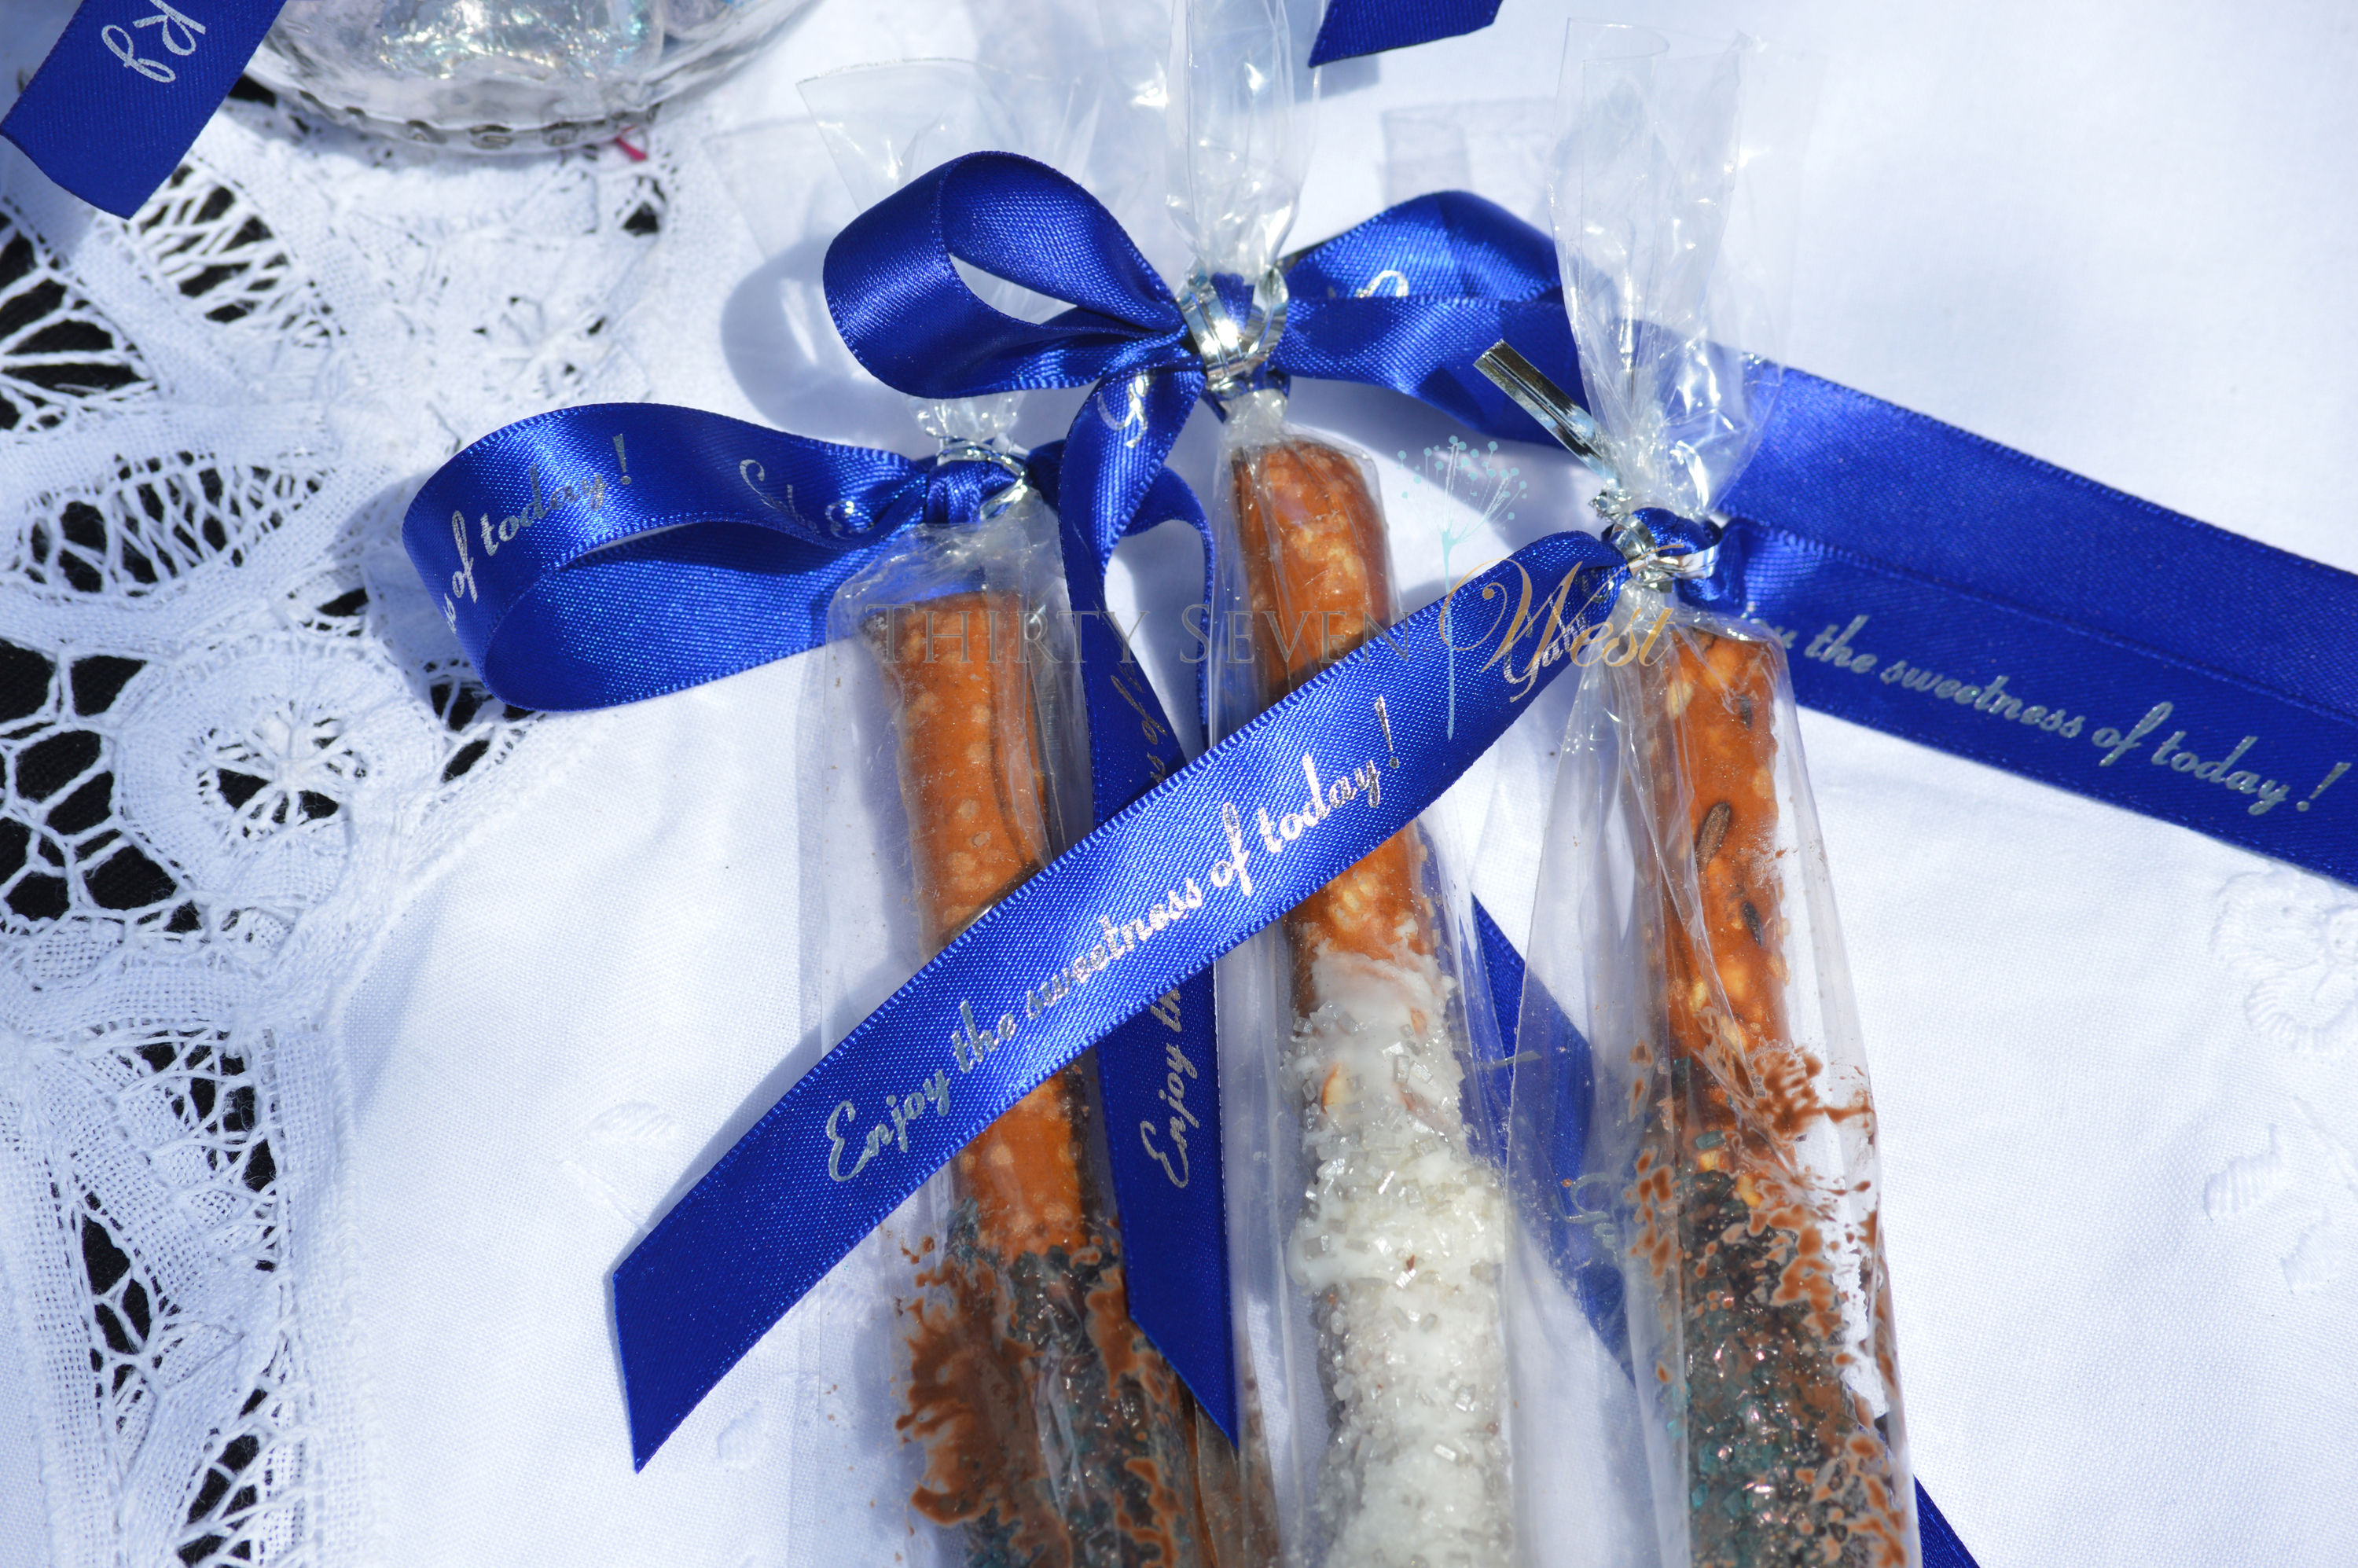 Personalized ribbon on Pretzels for Wedding Favors